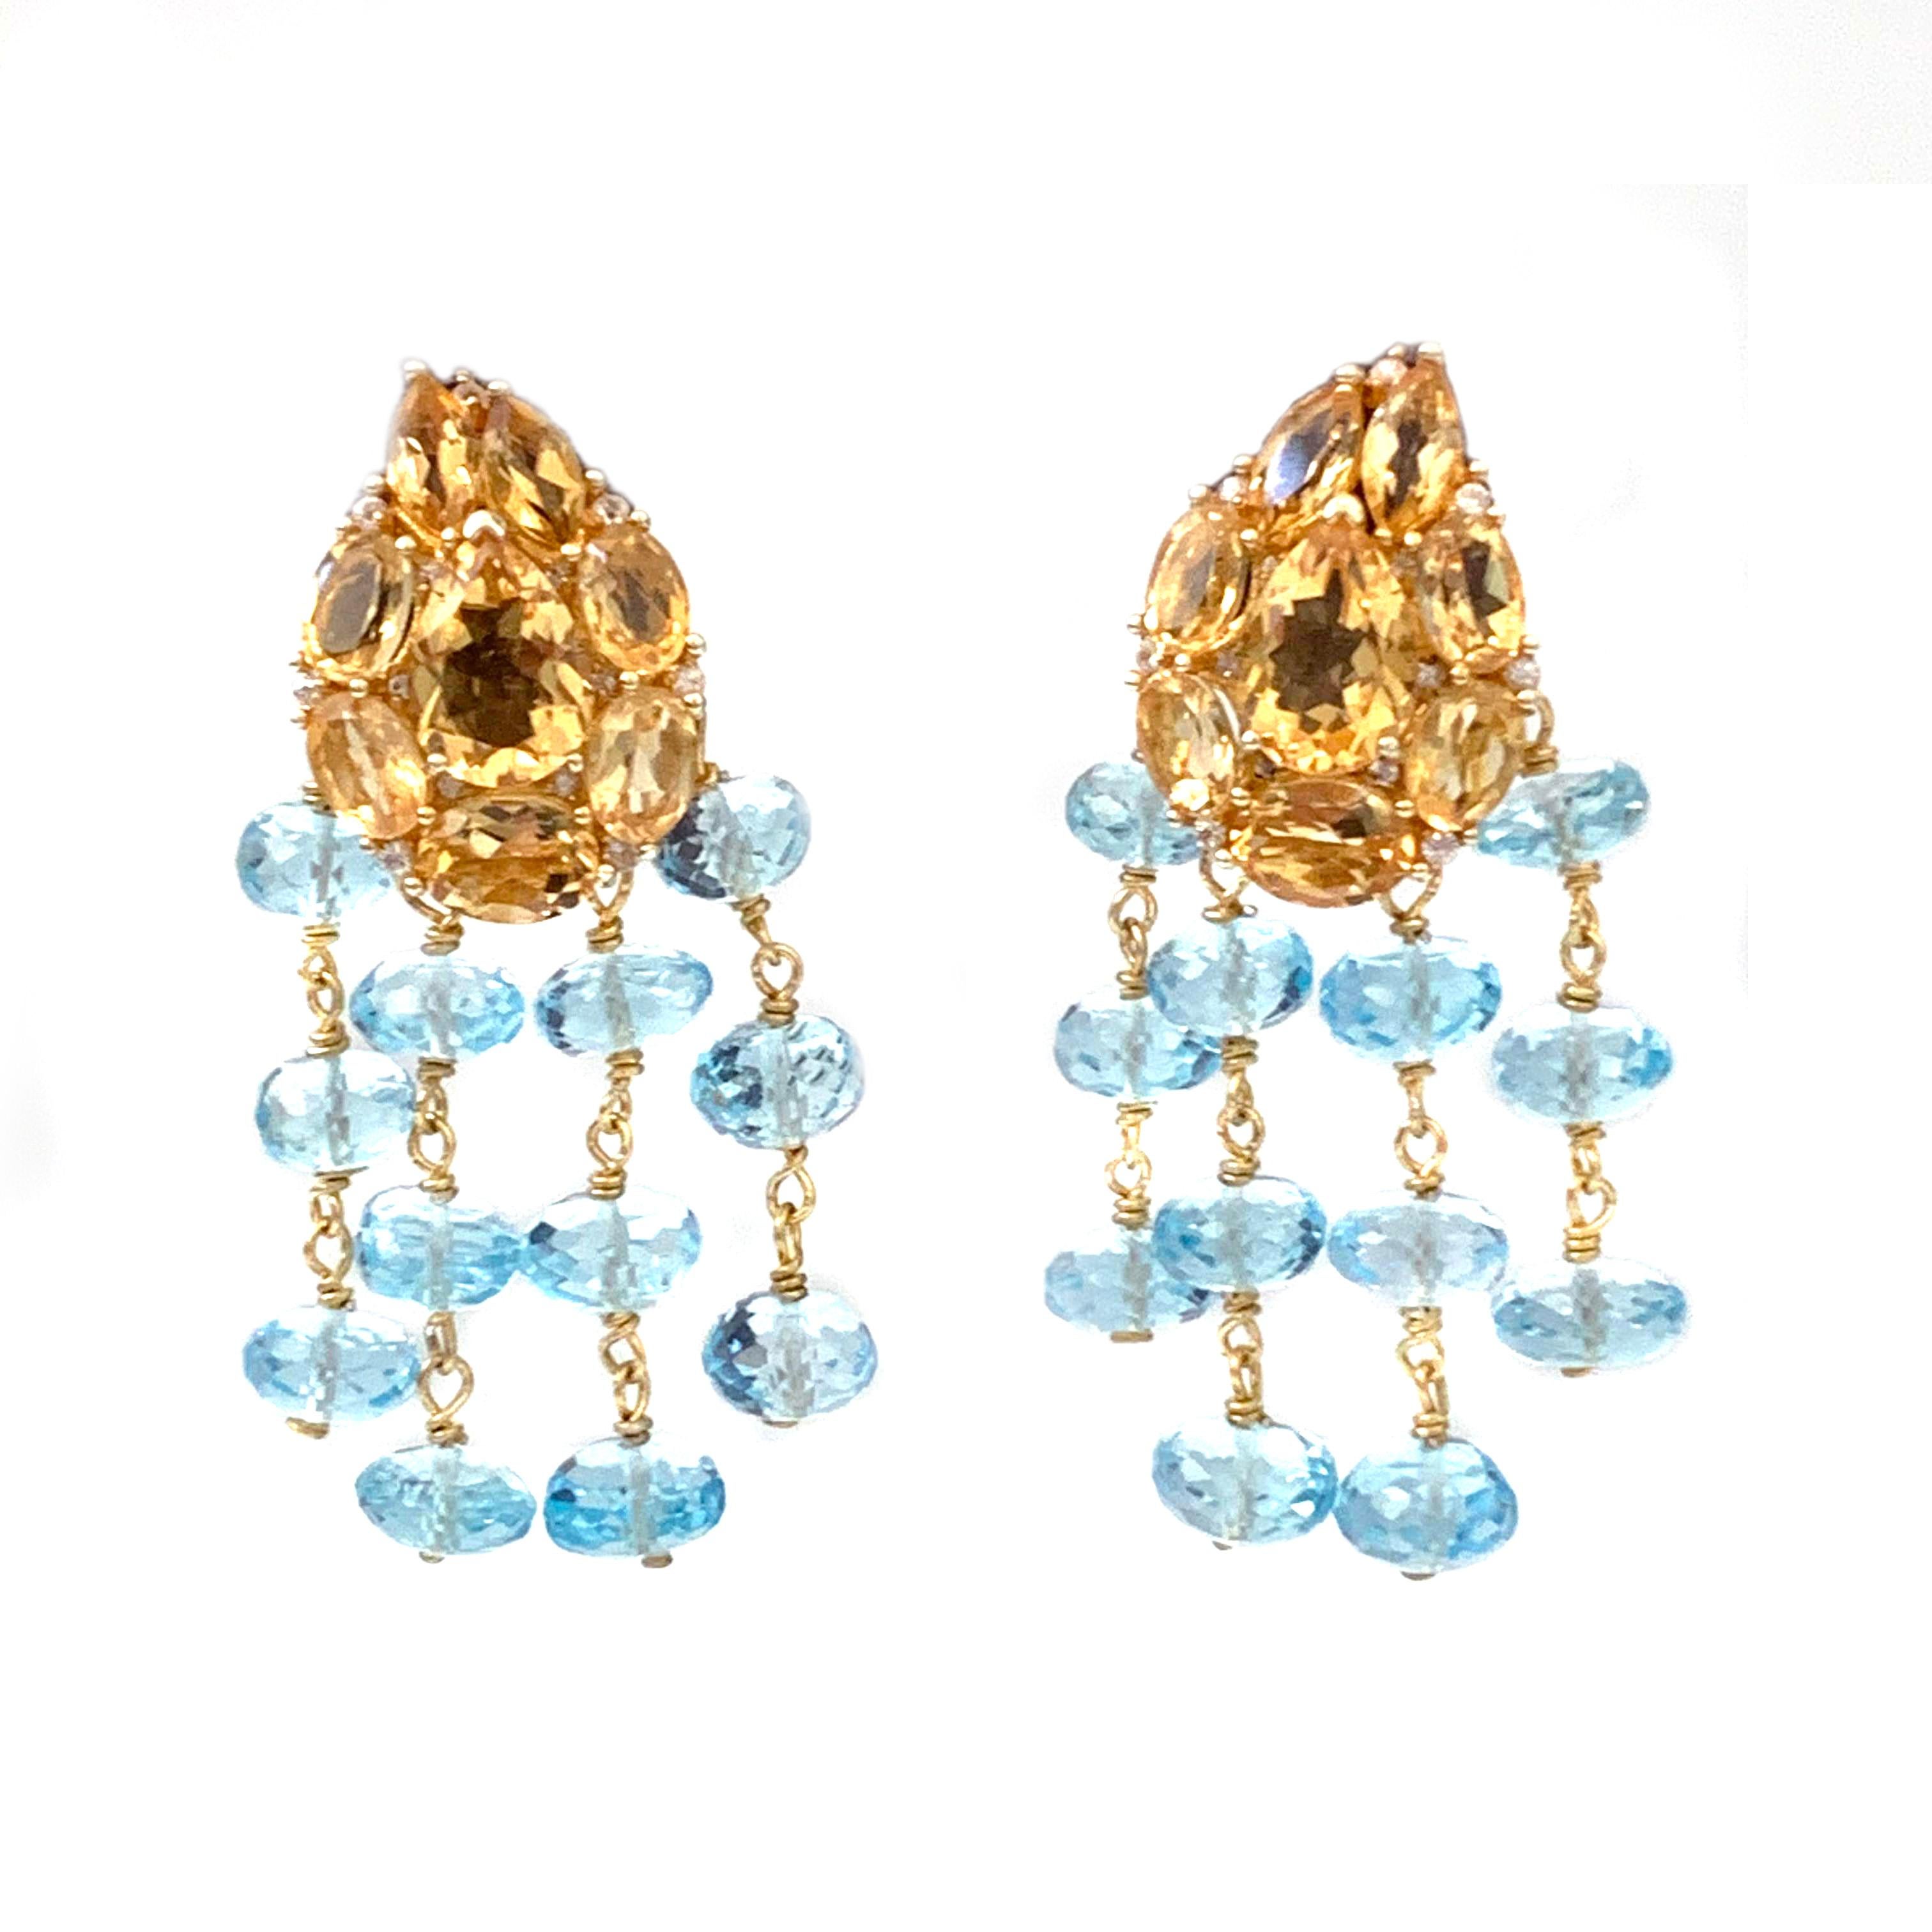 Contemporary Bijoux Num Clustered Citrine and Blue Topaz Dangle Earrings